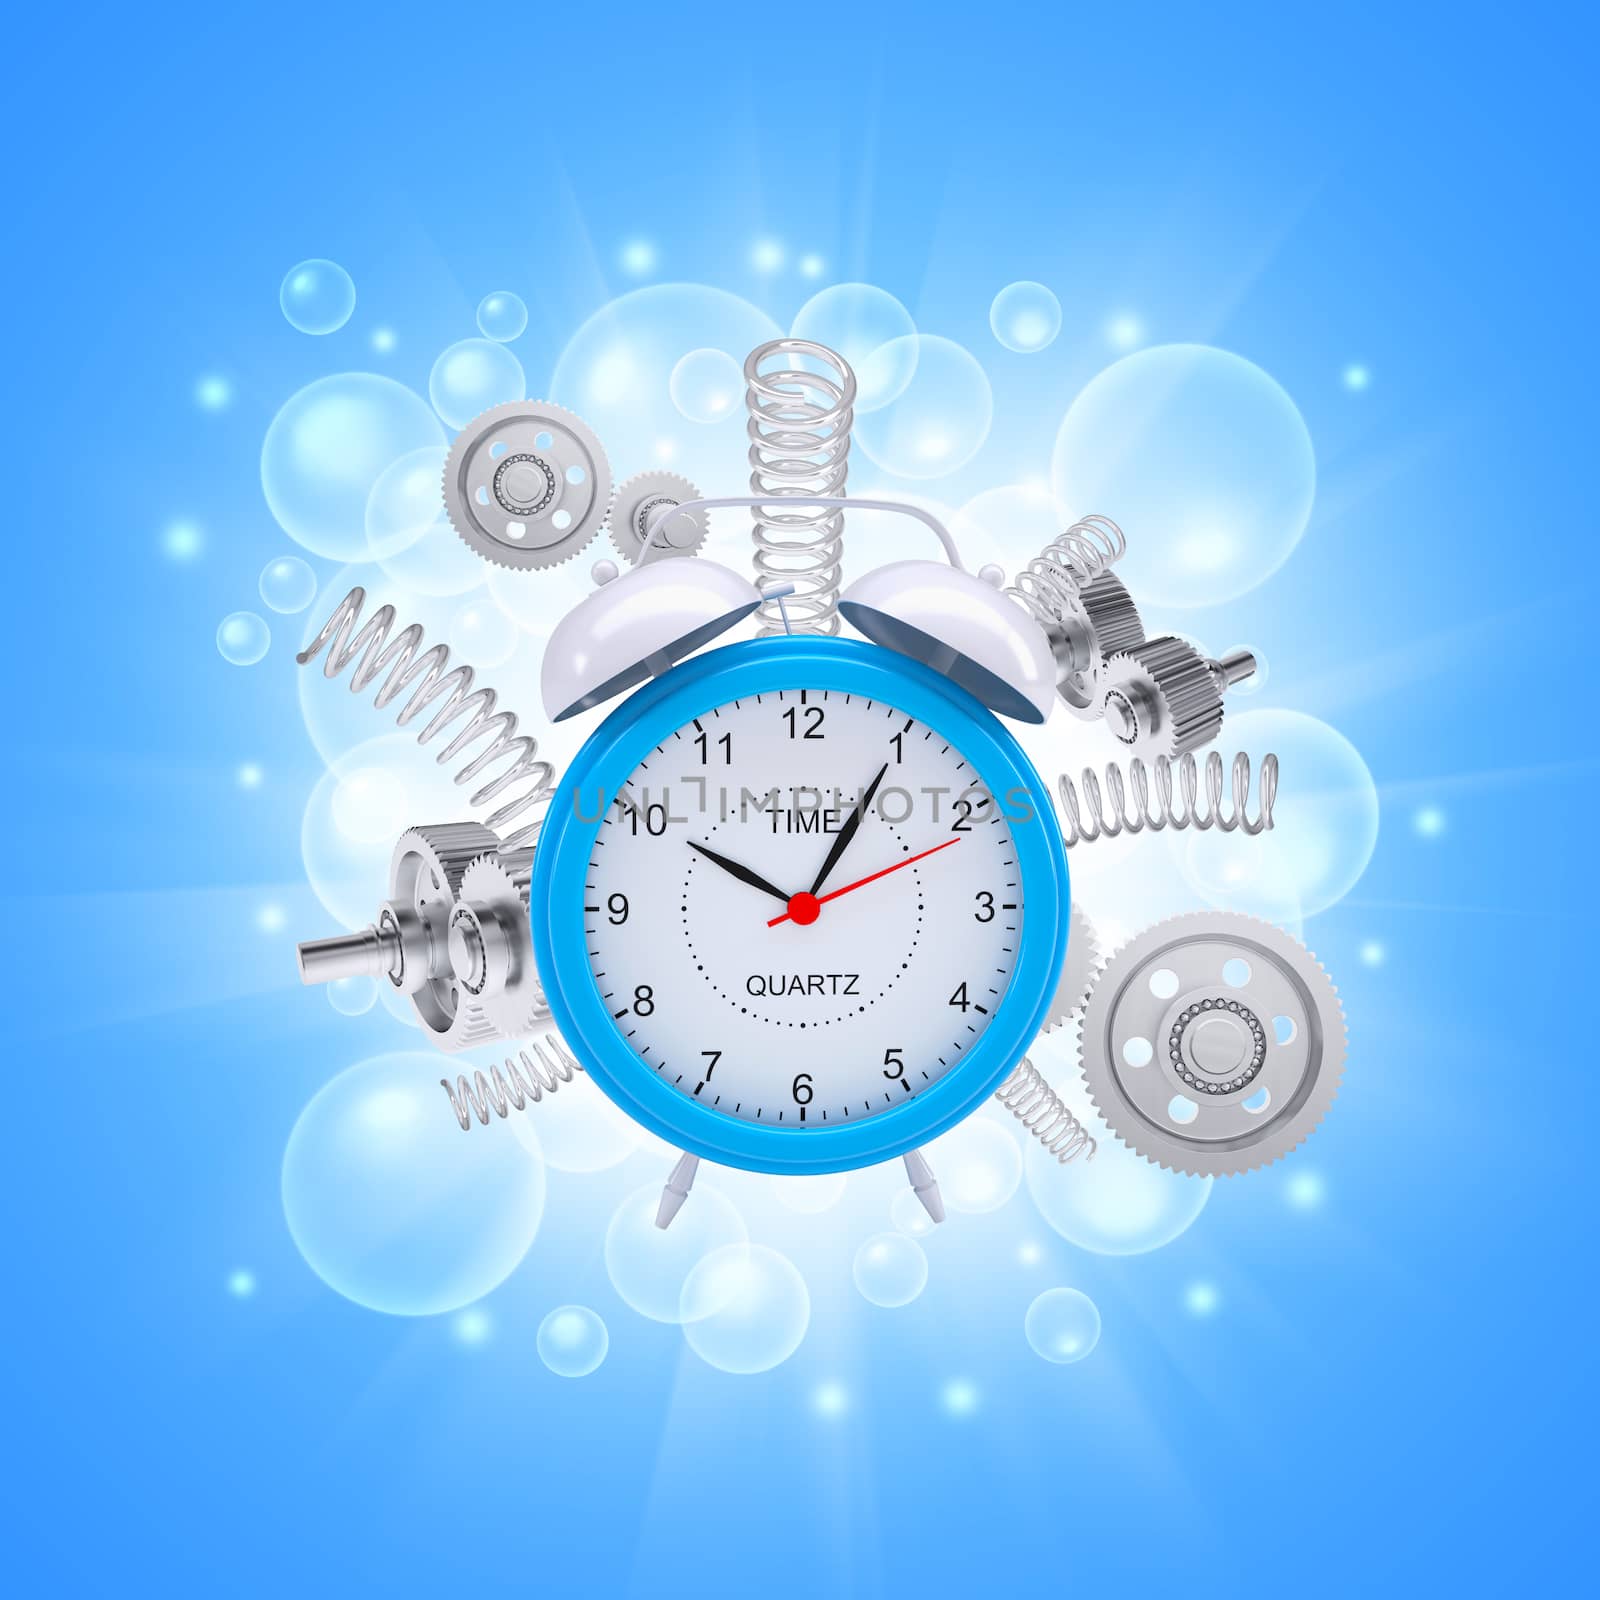 Alarm clock with springs and white gears. Blue background